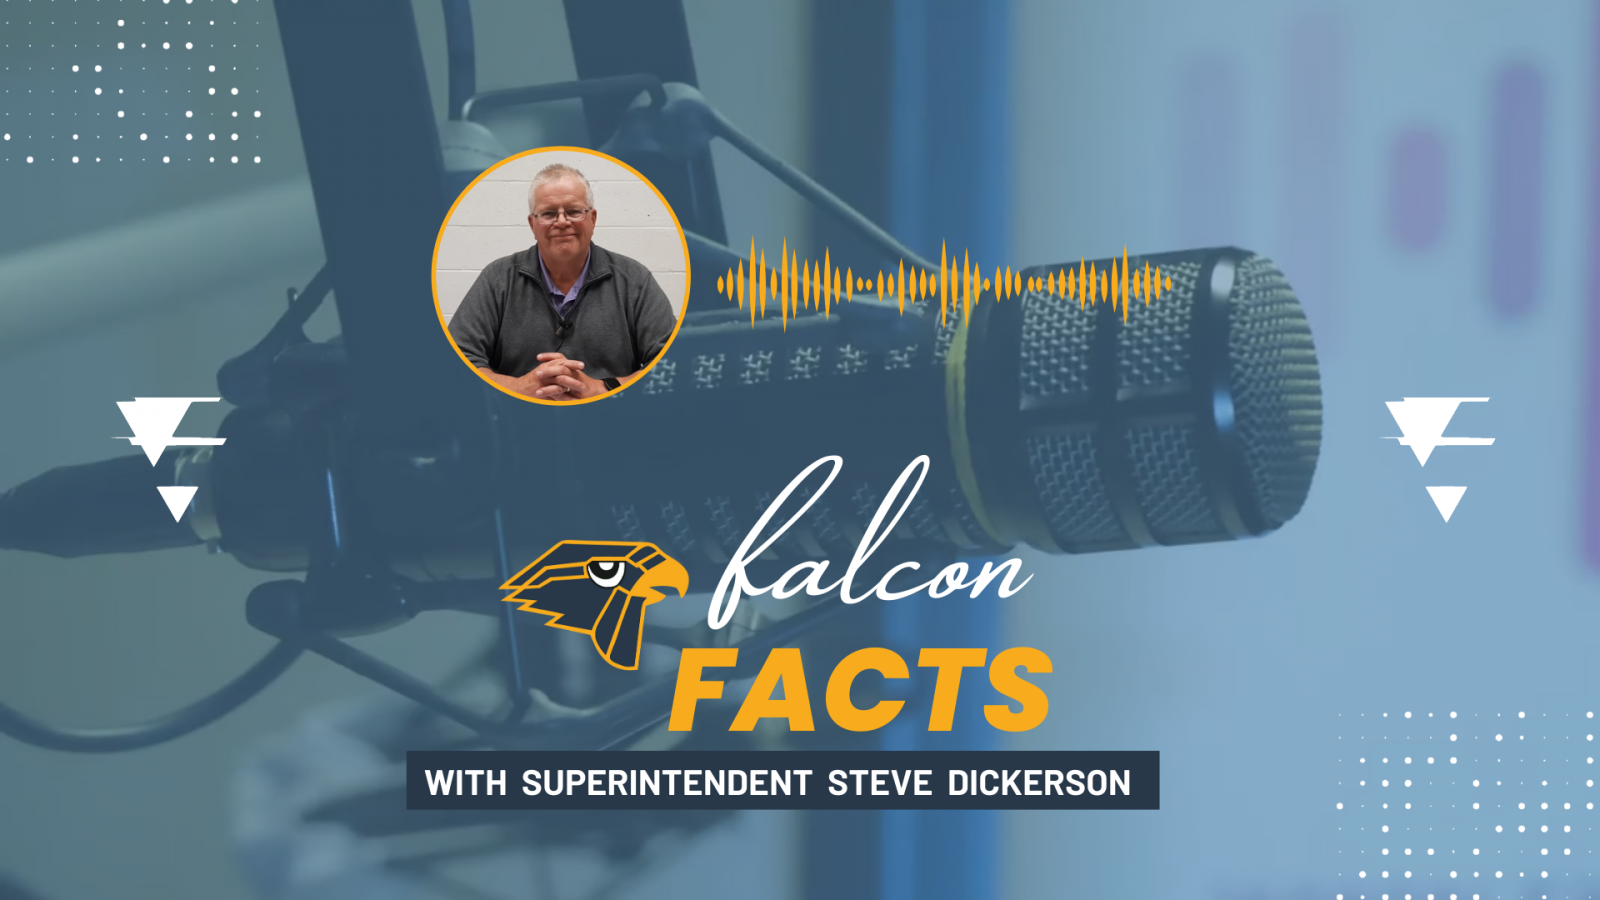 An image of the title card to the video on the page. Text: "Falcon Facts with Superintendent Steve Dickerson."